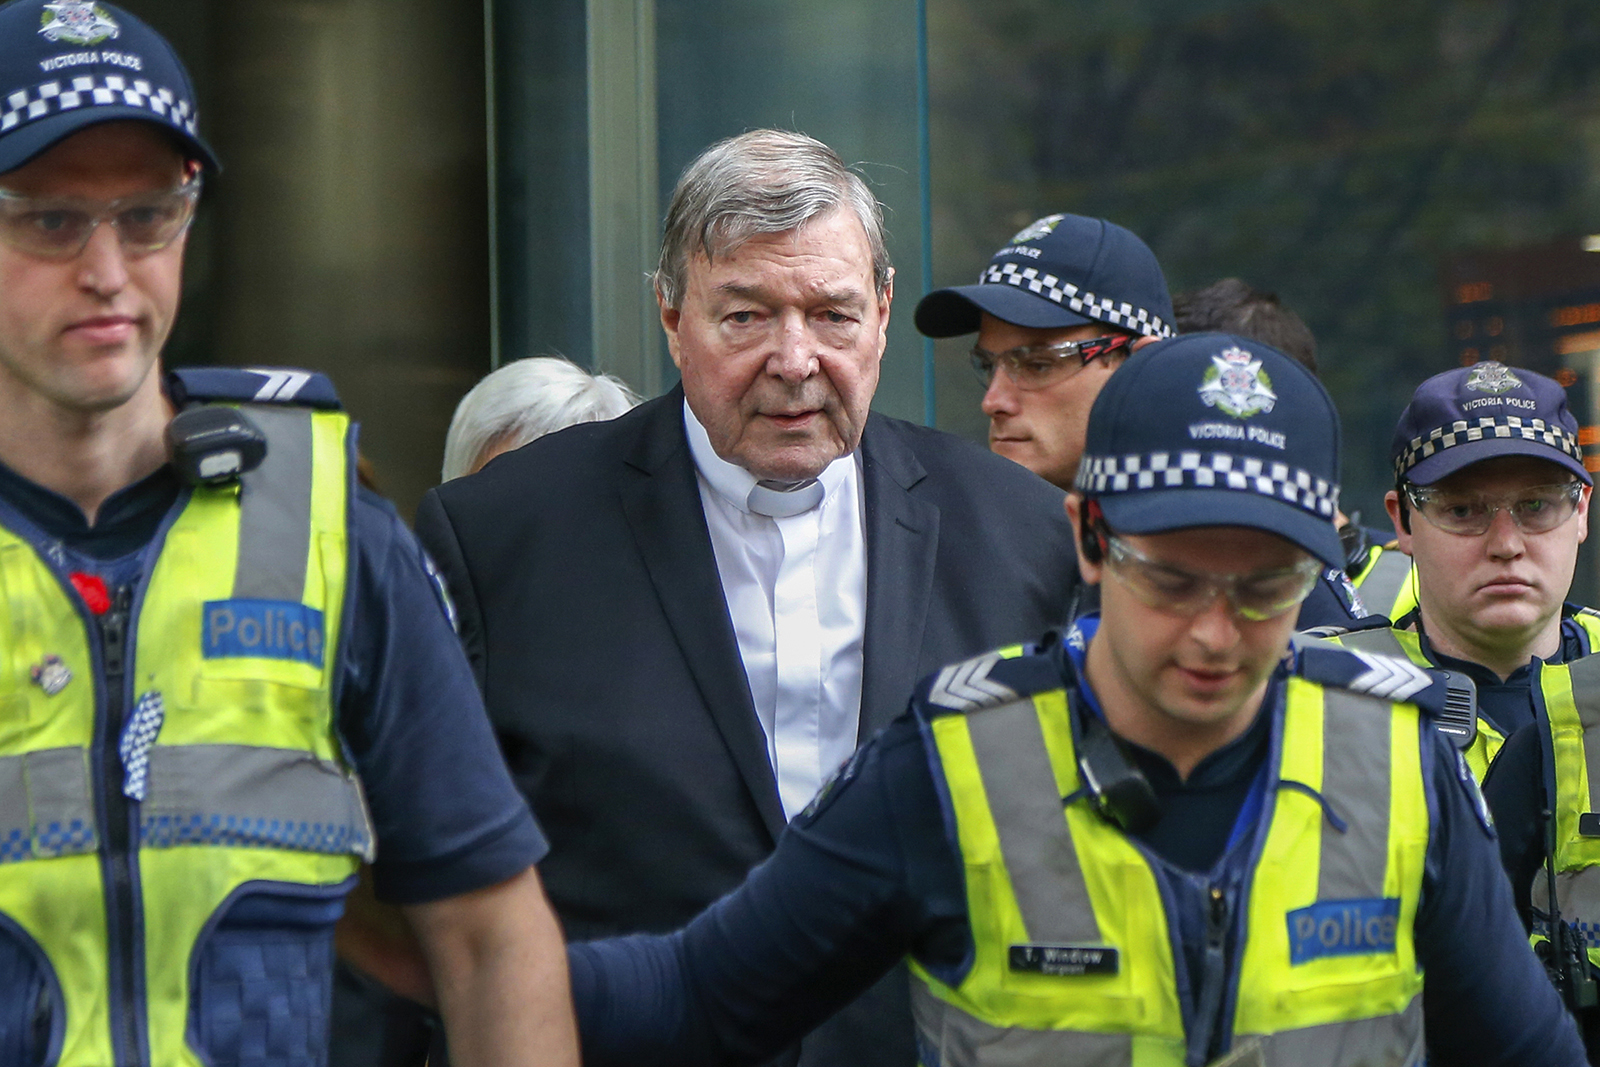 Cardinal George Pell, the most senior Catholic cleric to face sex charges, leaves court in Melbourne, Australia, on May 2, 2018. (AP Photo/Asanka Brendon Ratnayake)